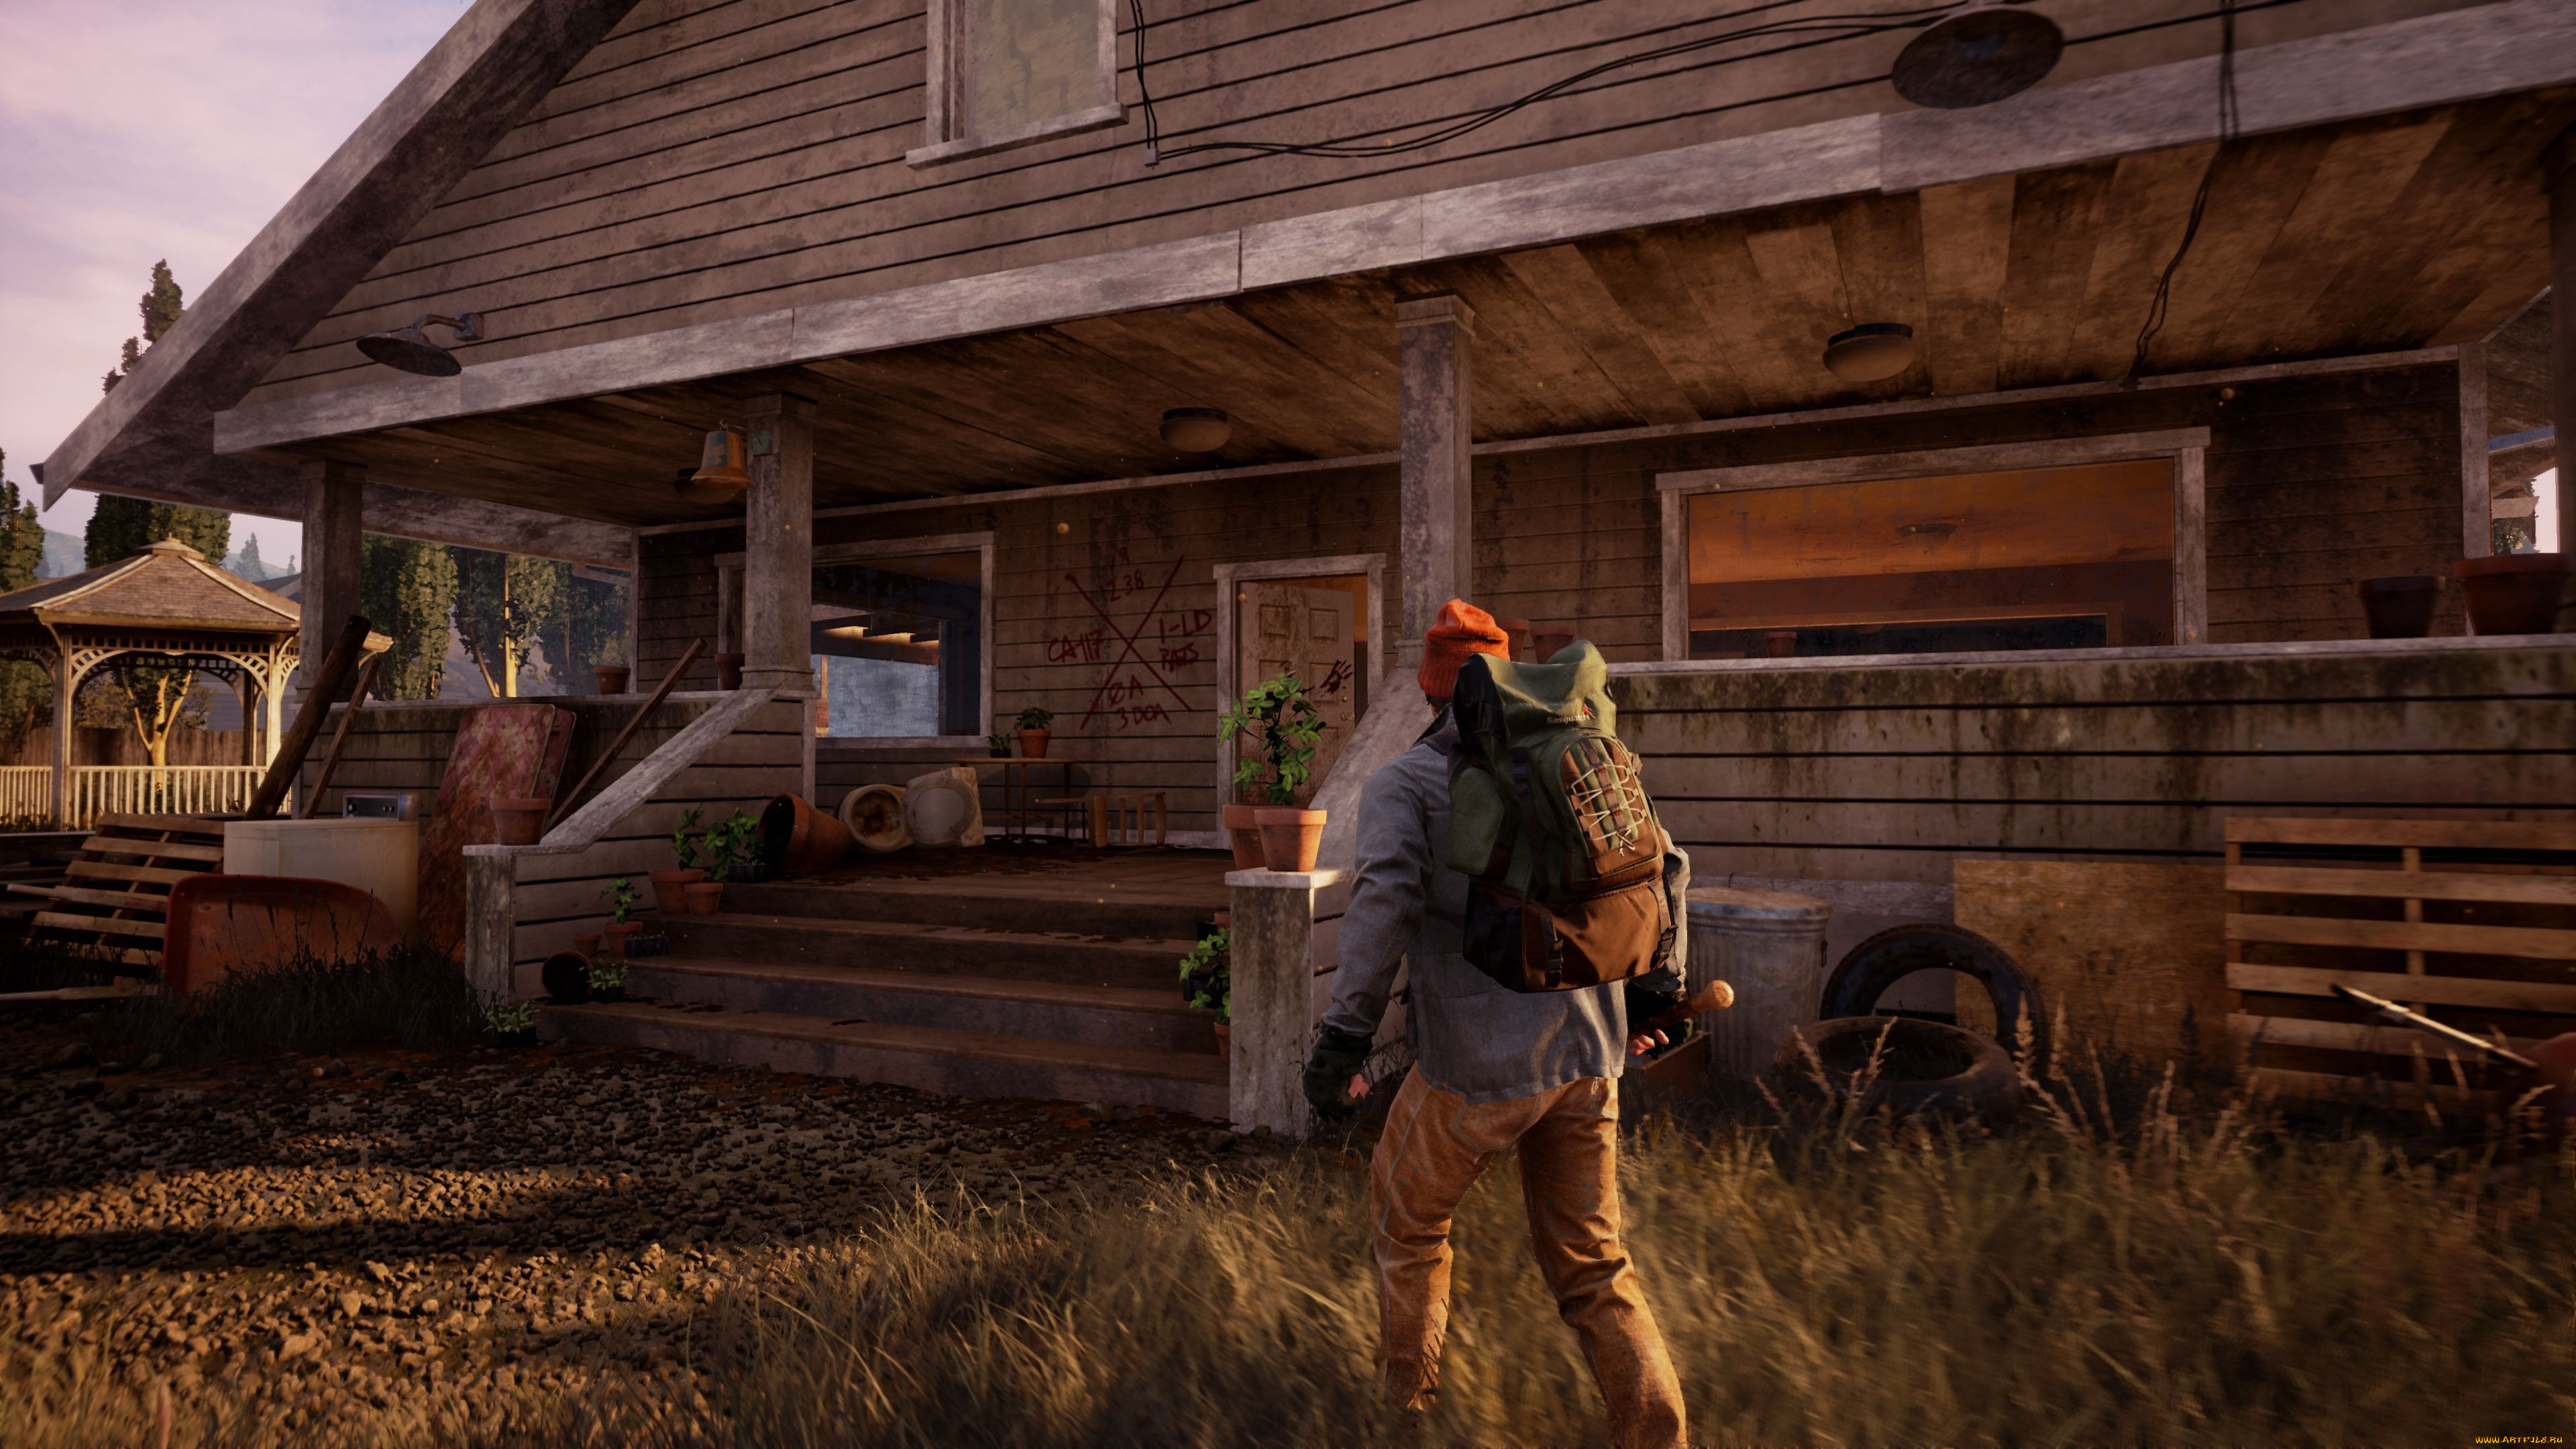 Key 2 house. State of Decay 2. Игра State of Decay 2. Лагерь у ферм State of Decay 2. State of Decay 2 Скриншоты.